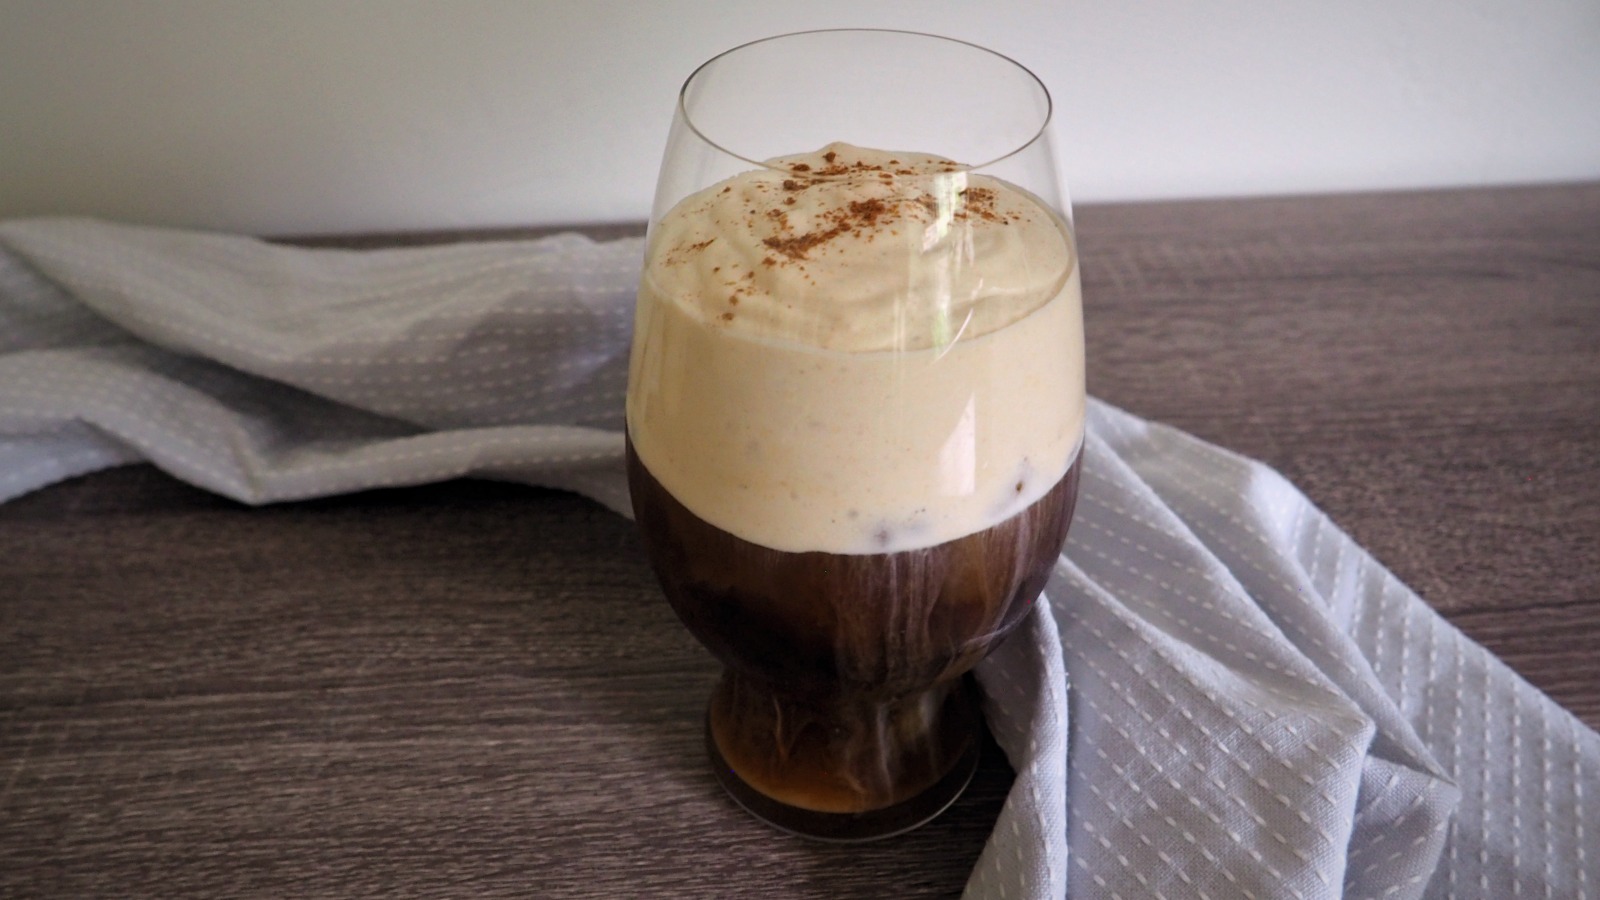 Make Starbucks Cold Brew Coffee at Home with This Copycat Recipe